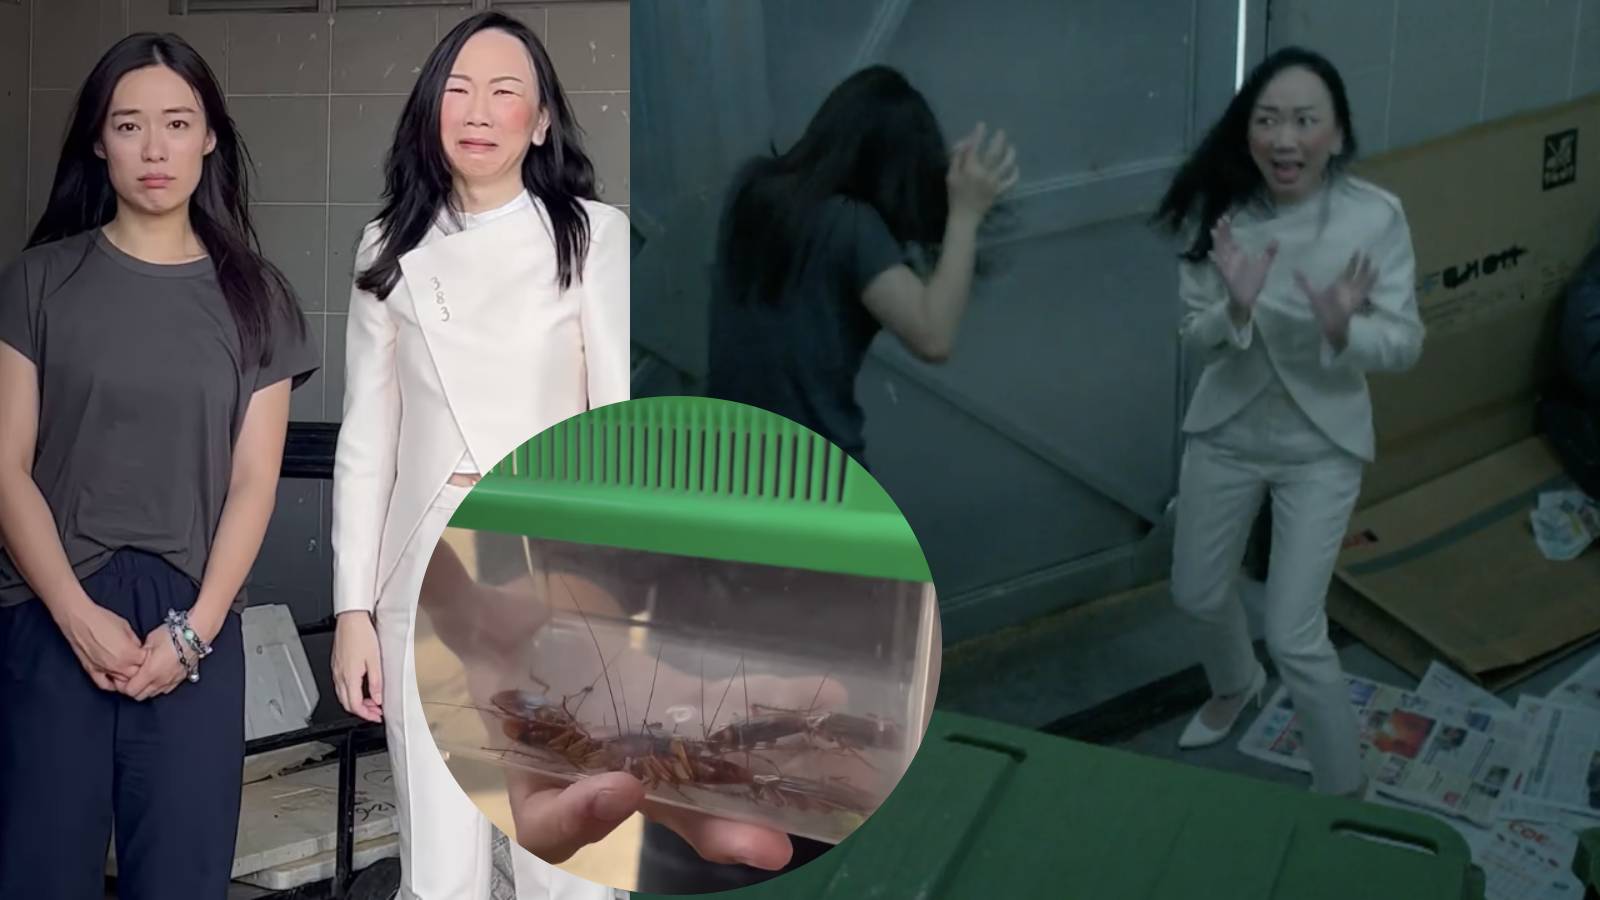 Rebecca Lim And Chiou Huey Had To Film With Live Cockroaches For This Icky Scene In Mediacorp Drama Soul Doctor